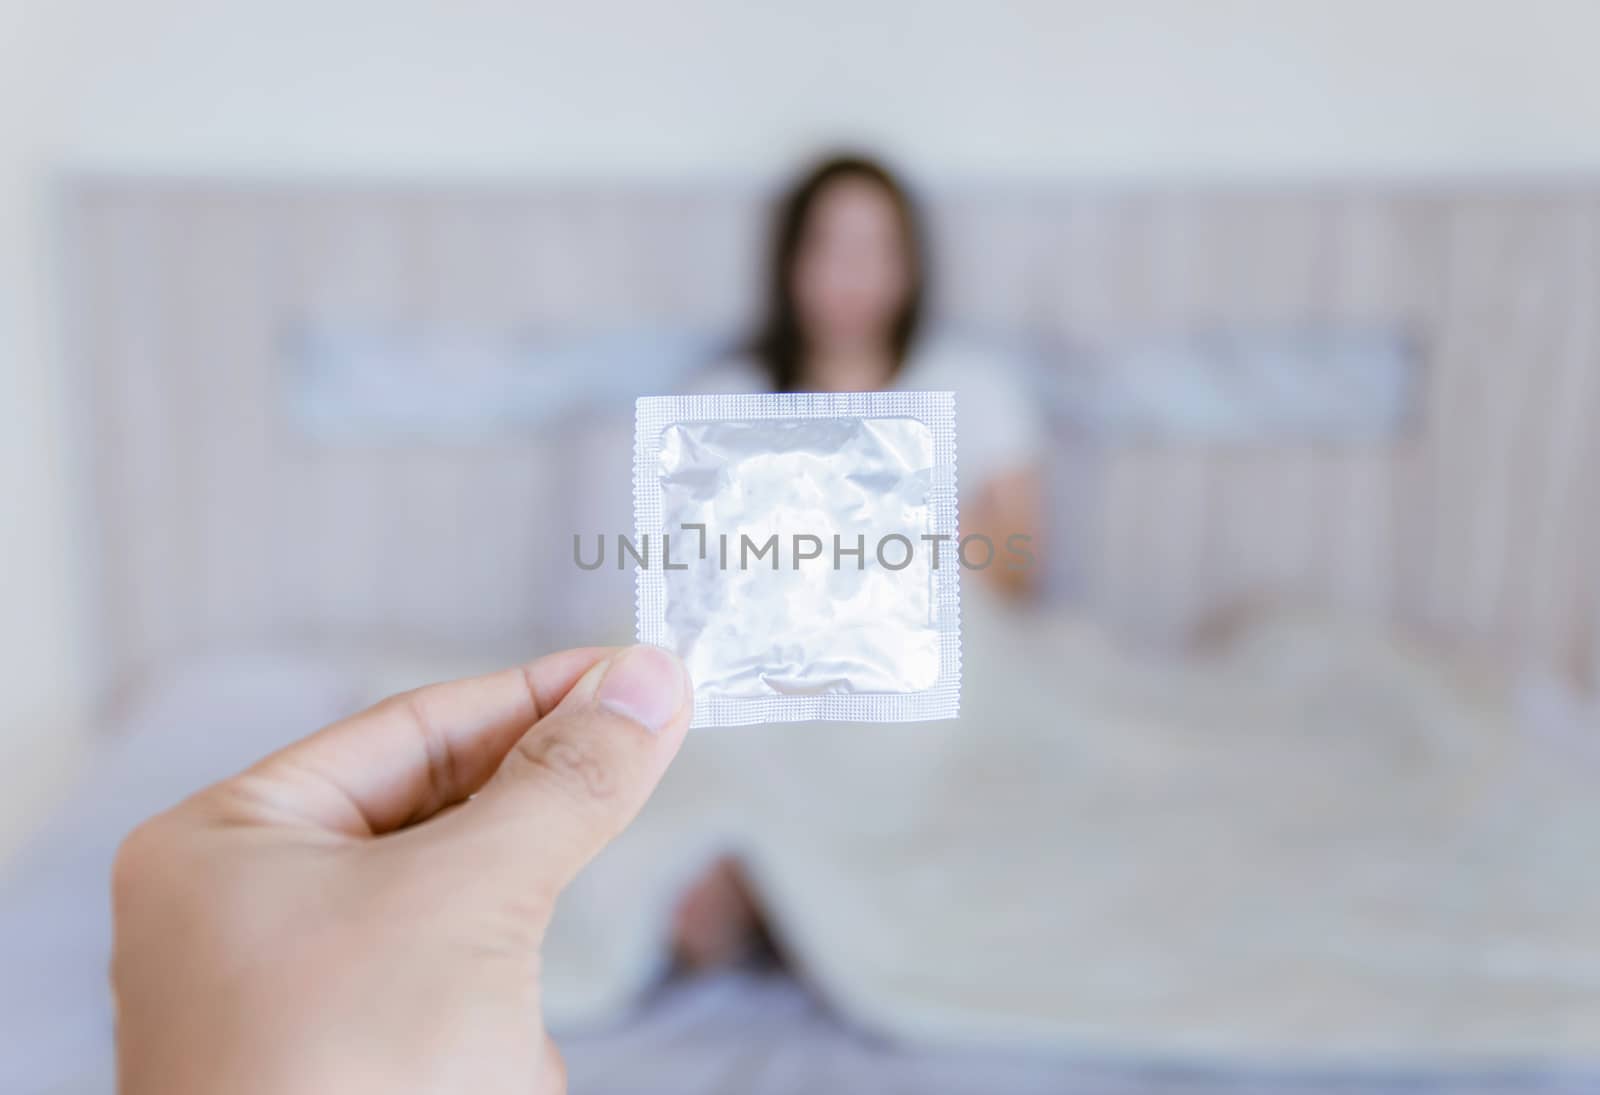 The man with the hand a condoms of the woman lying on the bed is blurred